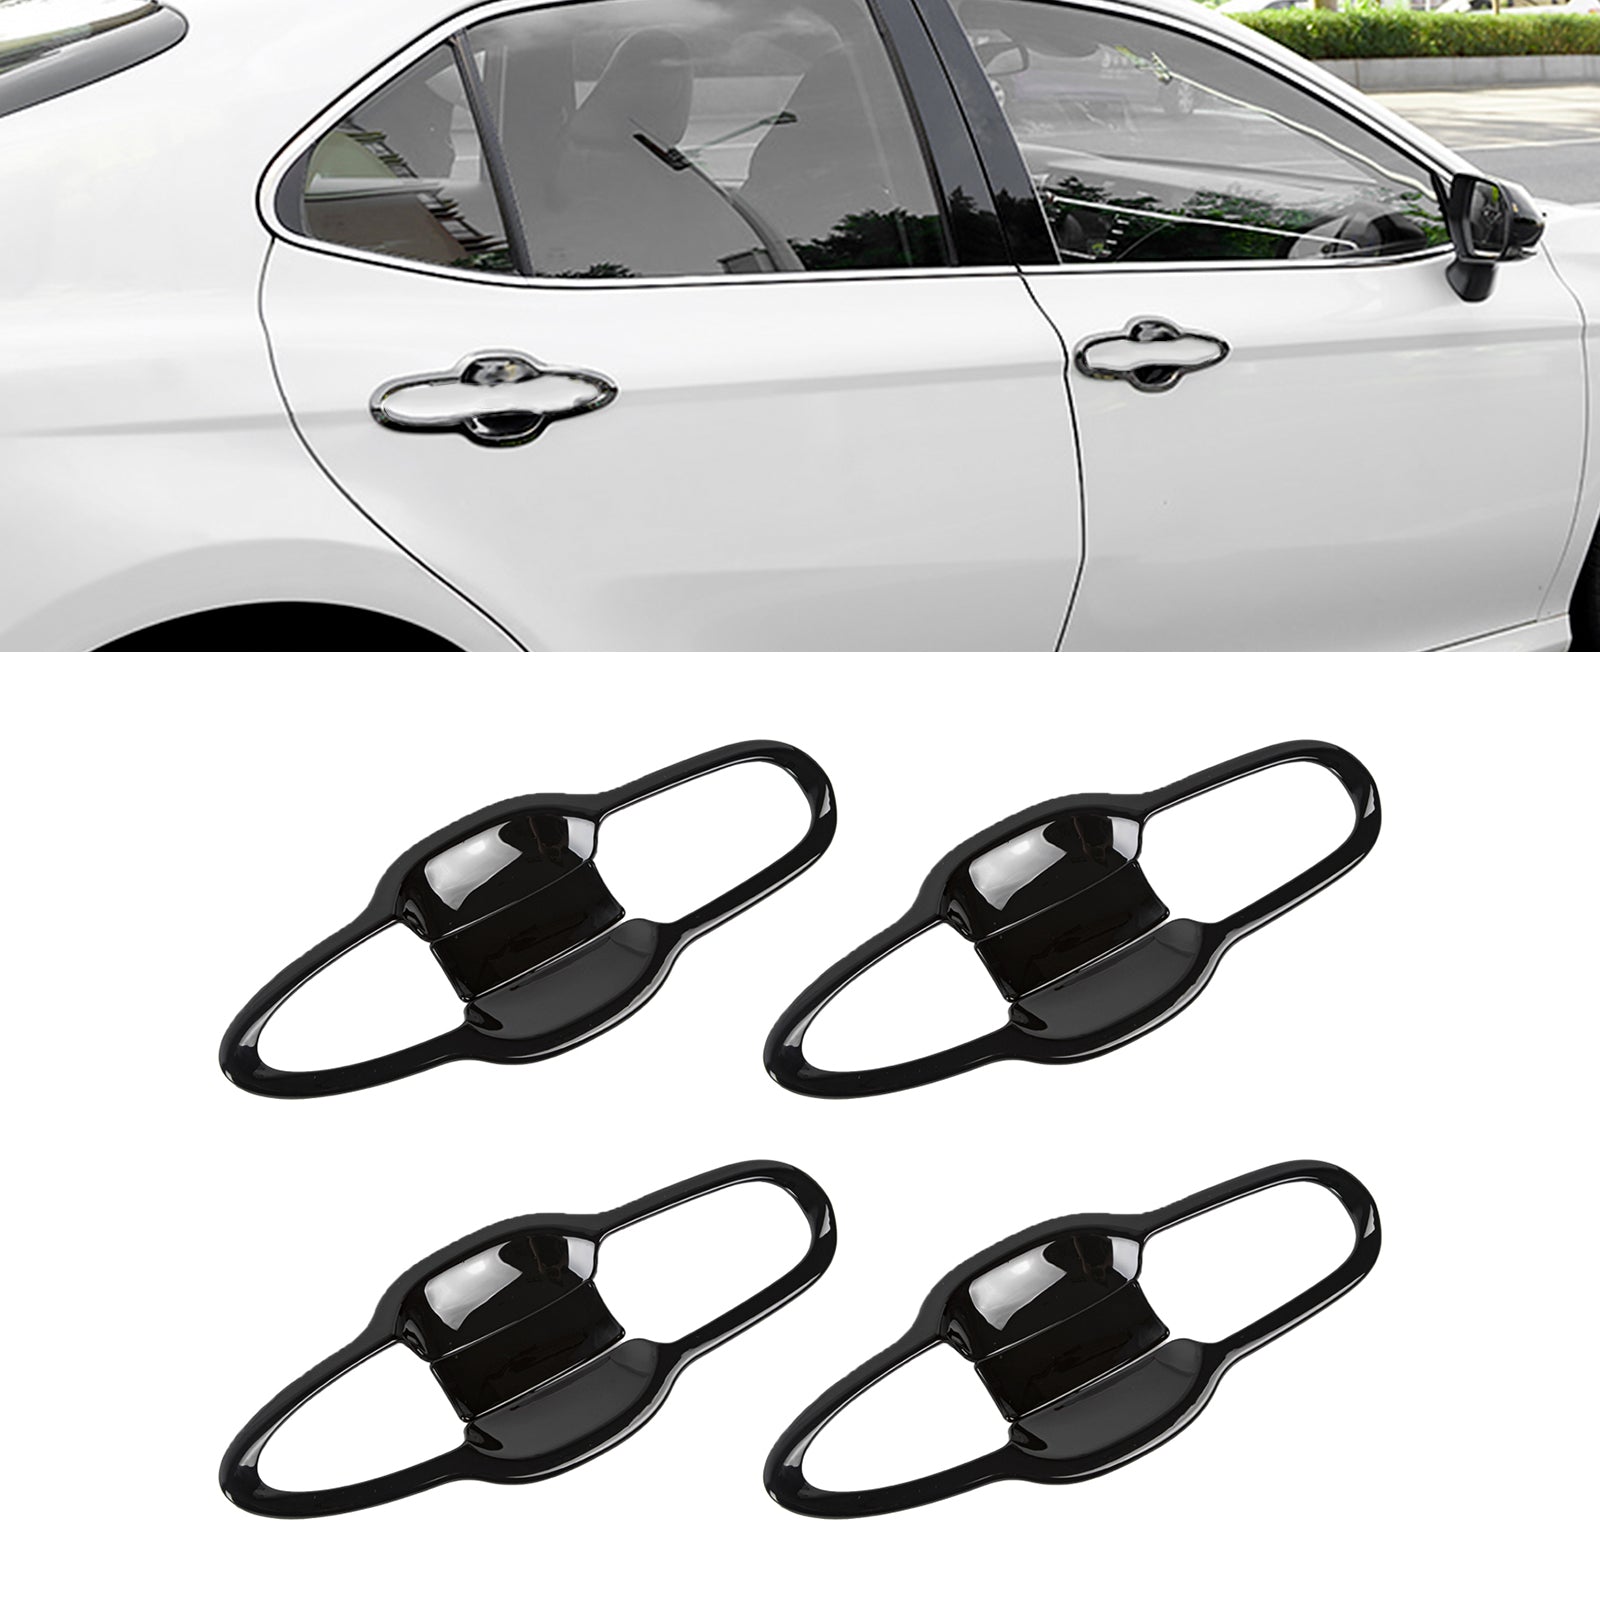 8X Car Door Handle Bowl Anti Scratch Stickers Protector Cover